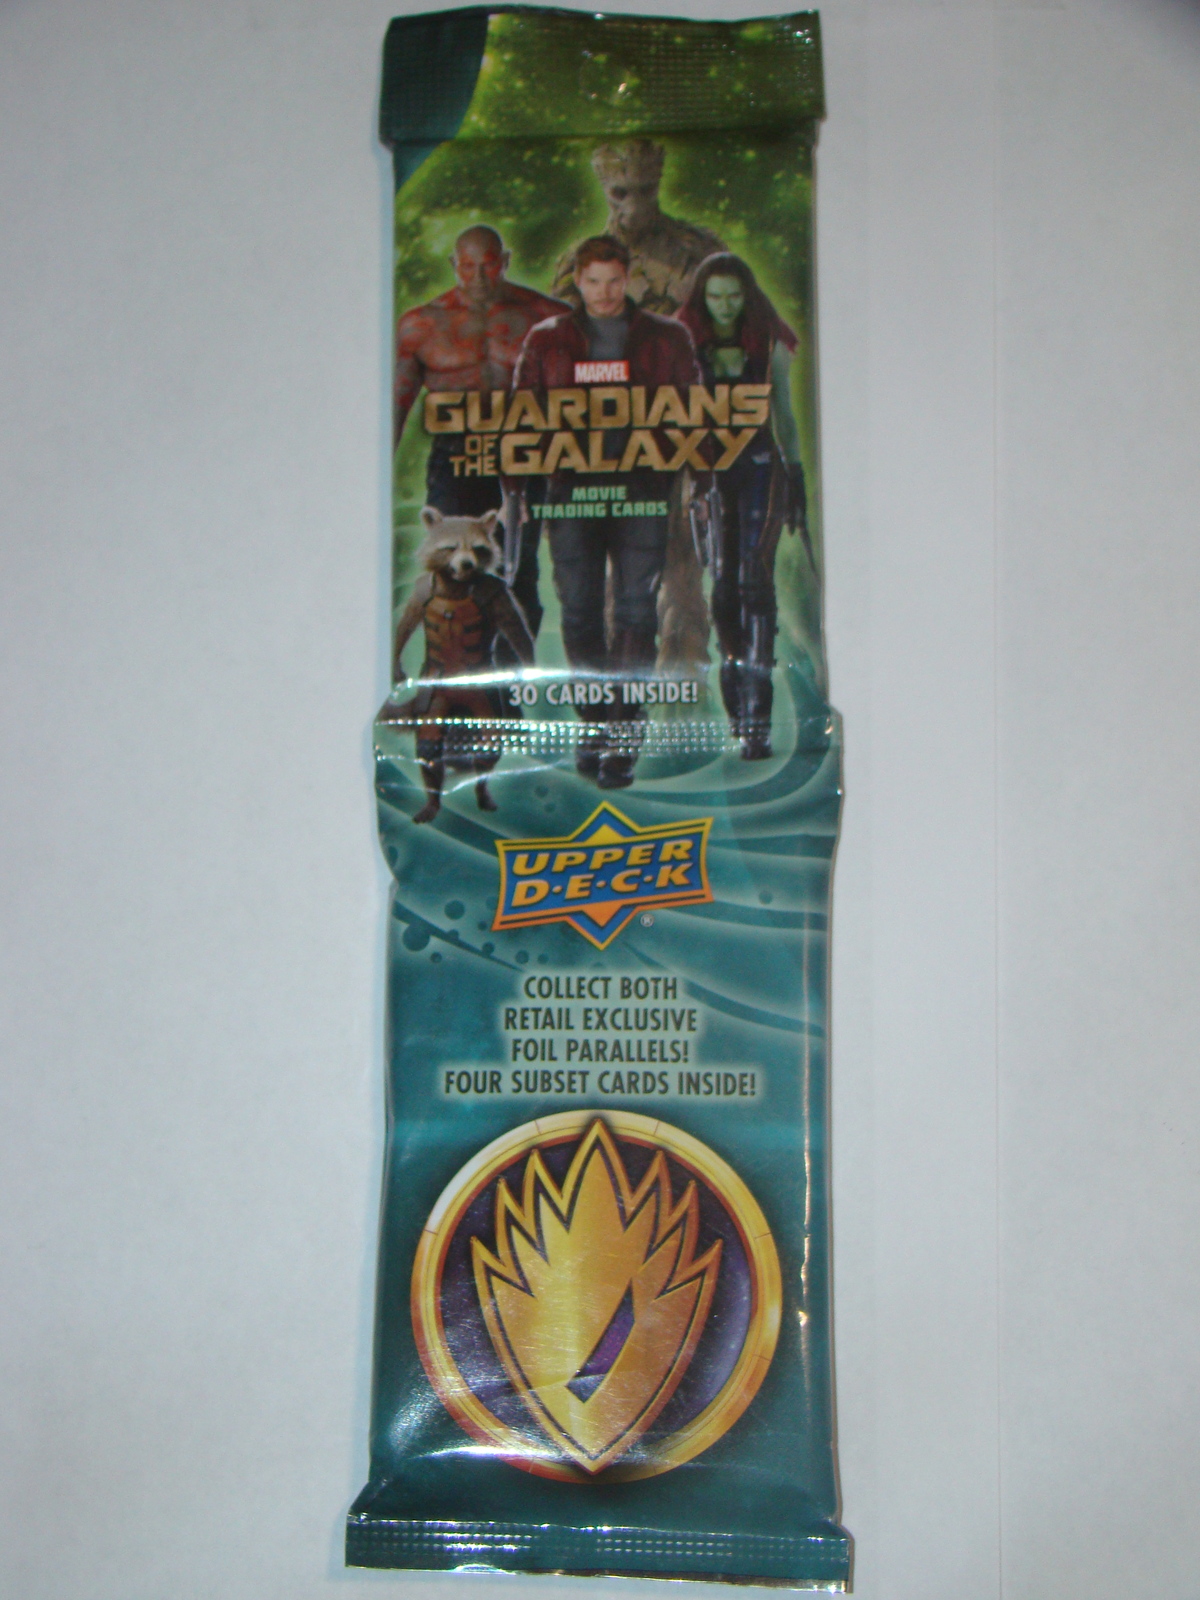 UPPER DECK - GUARDIANS OF THE GALAXY - MOVIE TRADING CARDS (30 CARDS) - $15.00